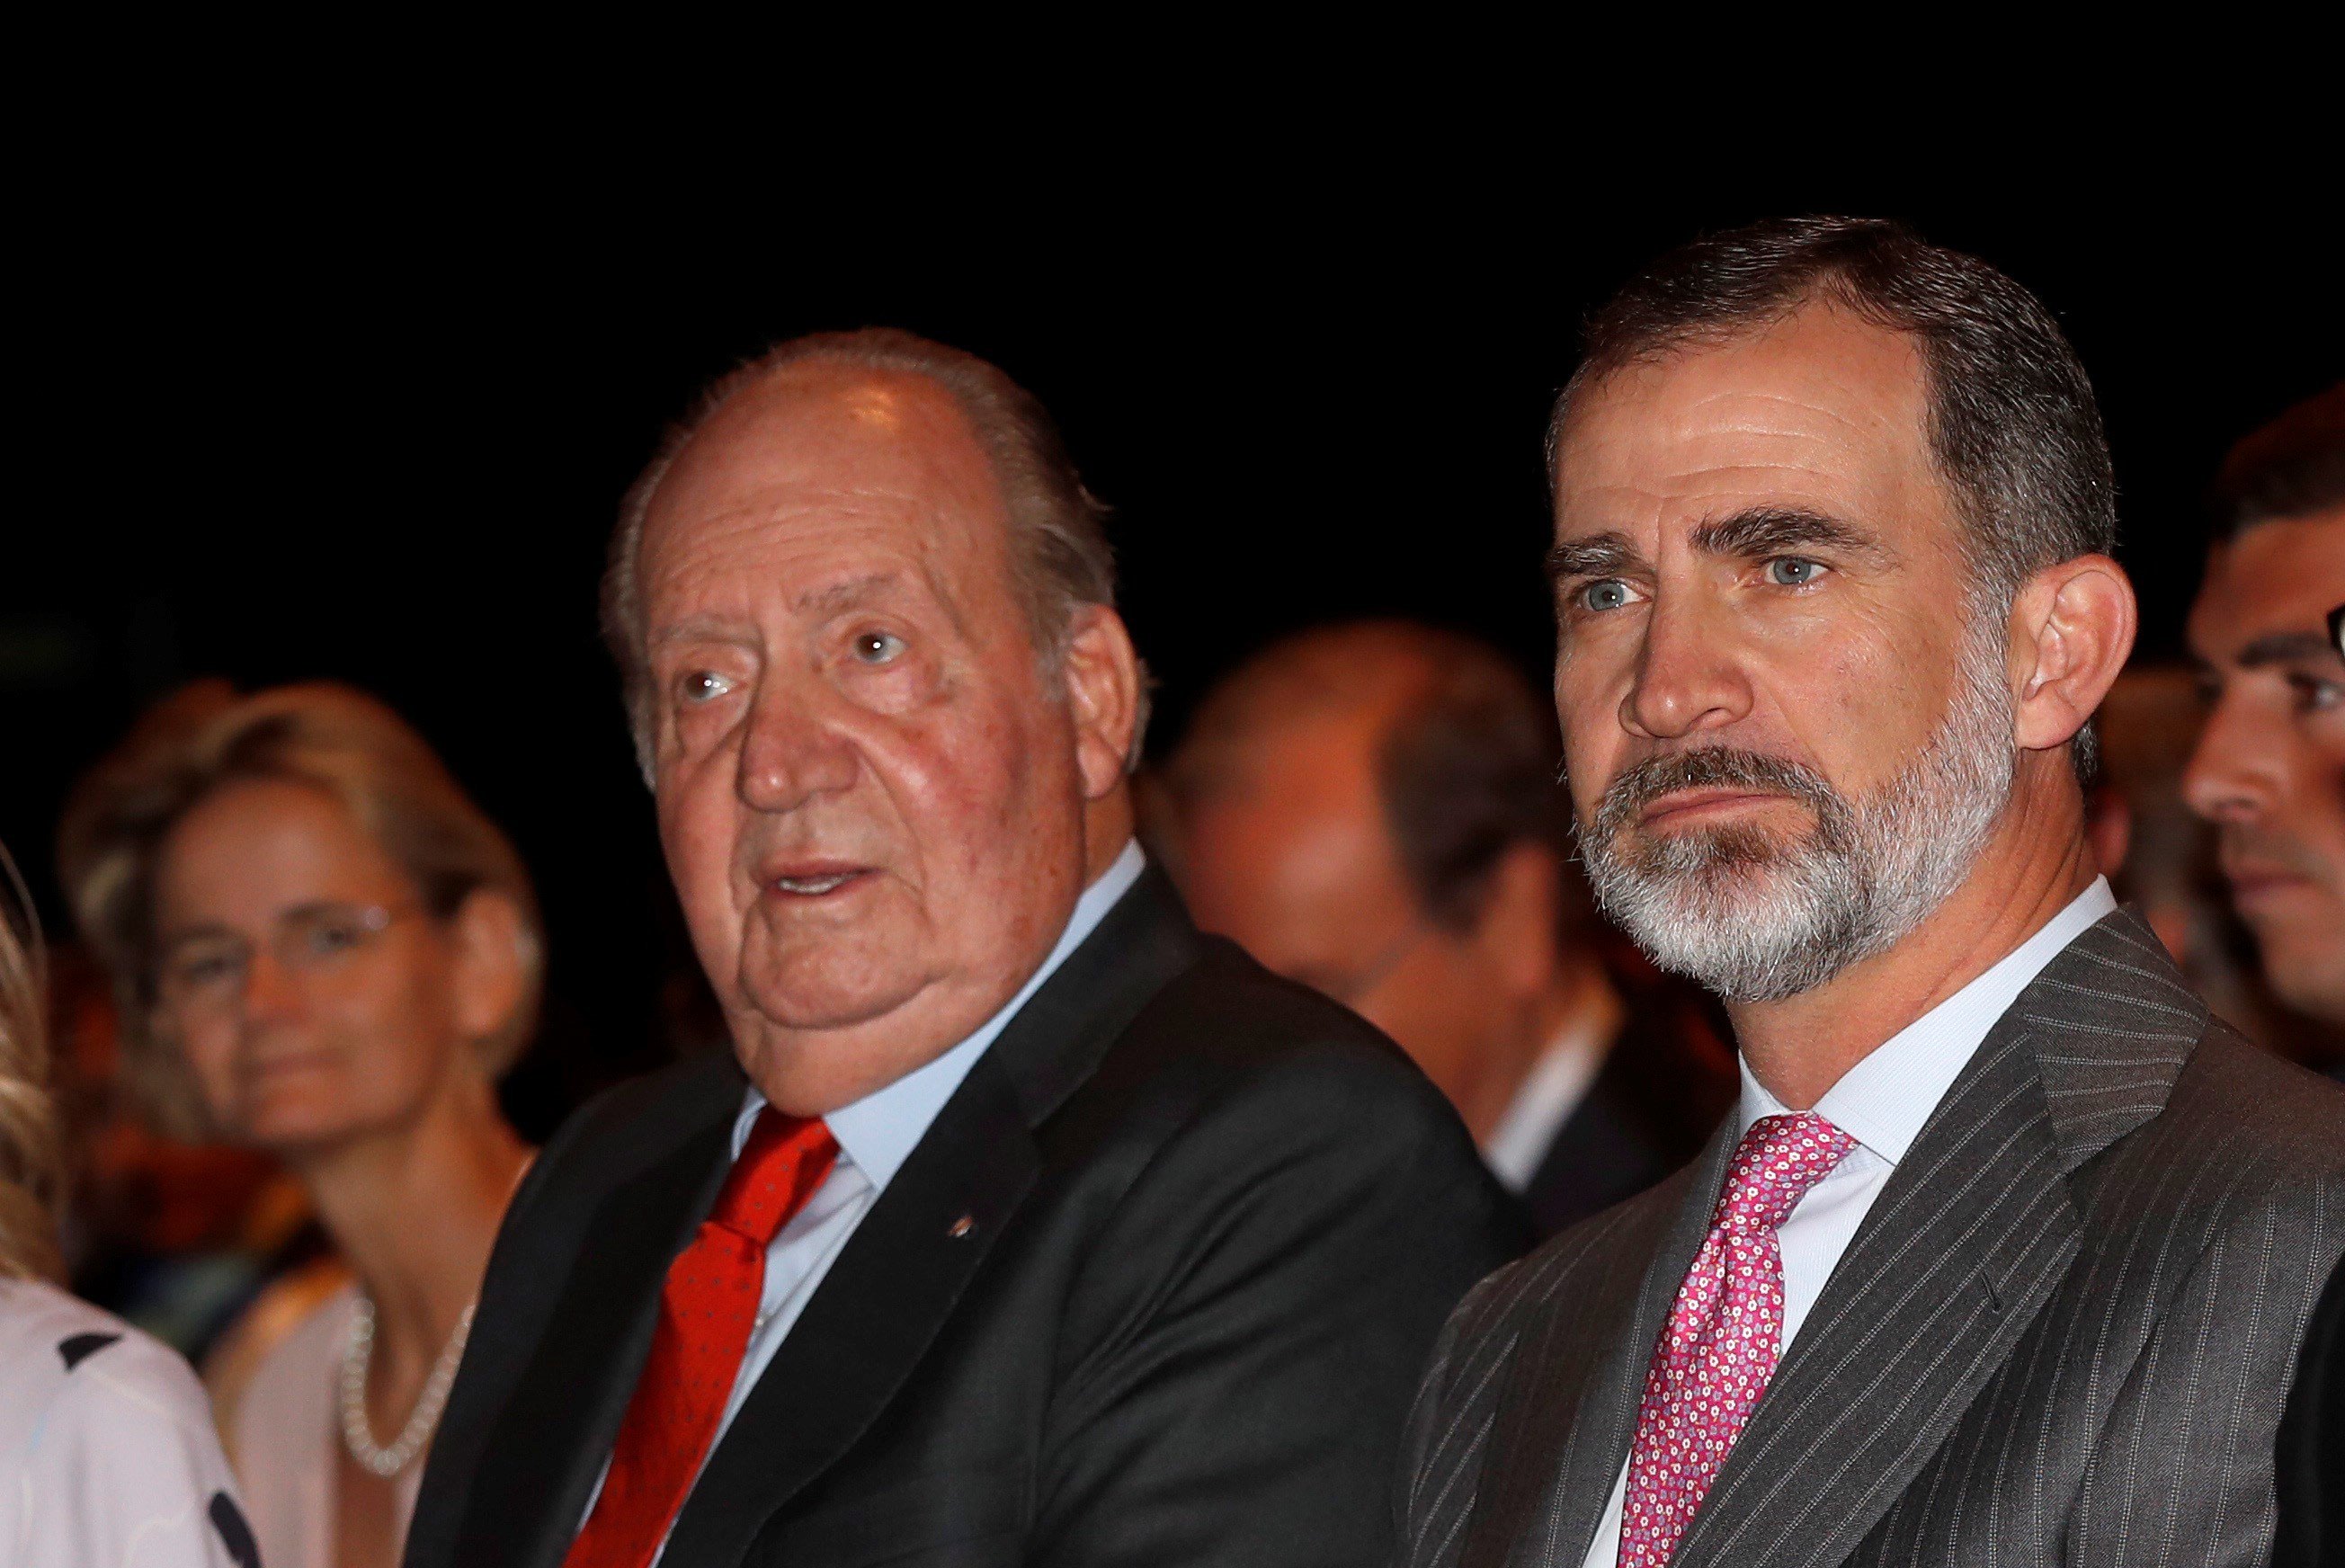 Ex-lover implicates Juan Carlos I in Nóos corruption scandal: "He gave the instructions"